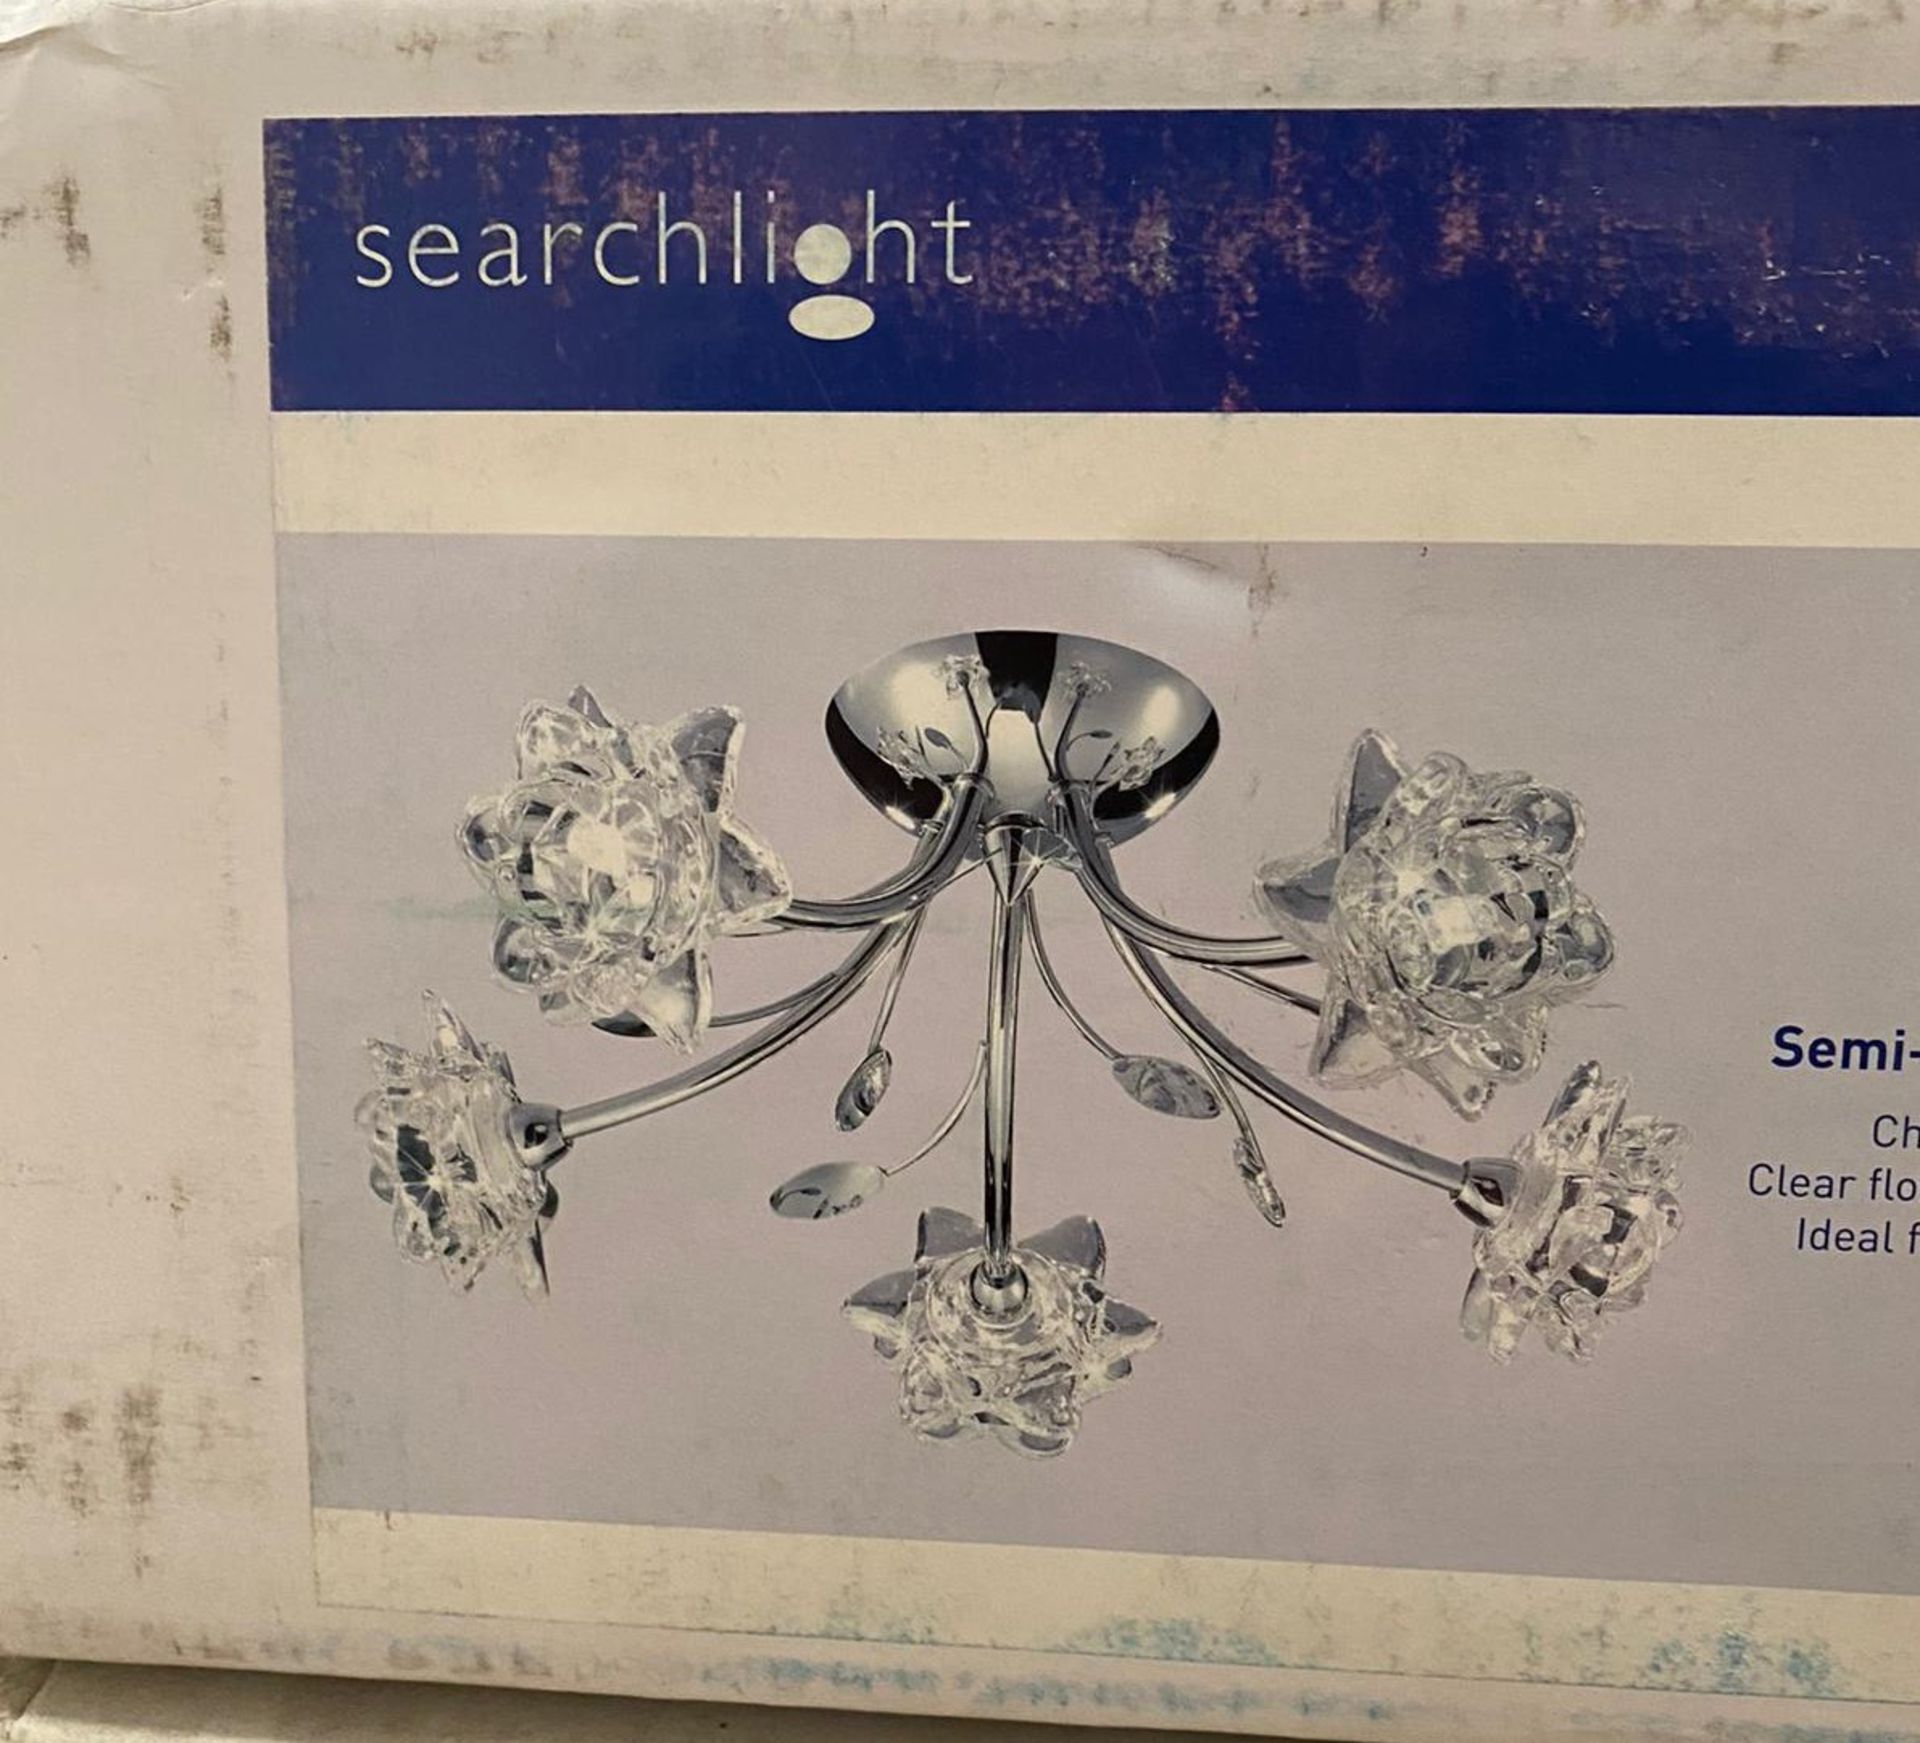 1 x Searchlight Bellis II Semi-flush fitting in chrome - Ref: 9285-5CC - New and Boxed - RRP £100 - Image 3 of 4